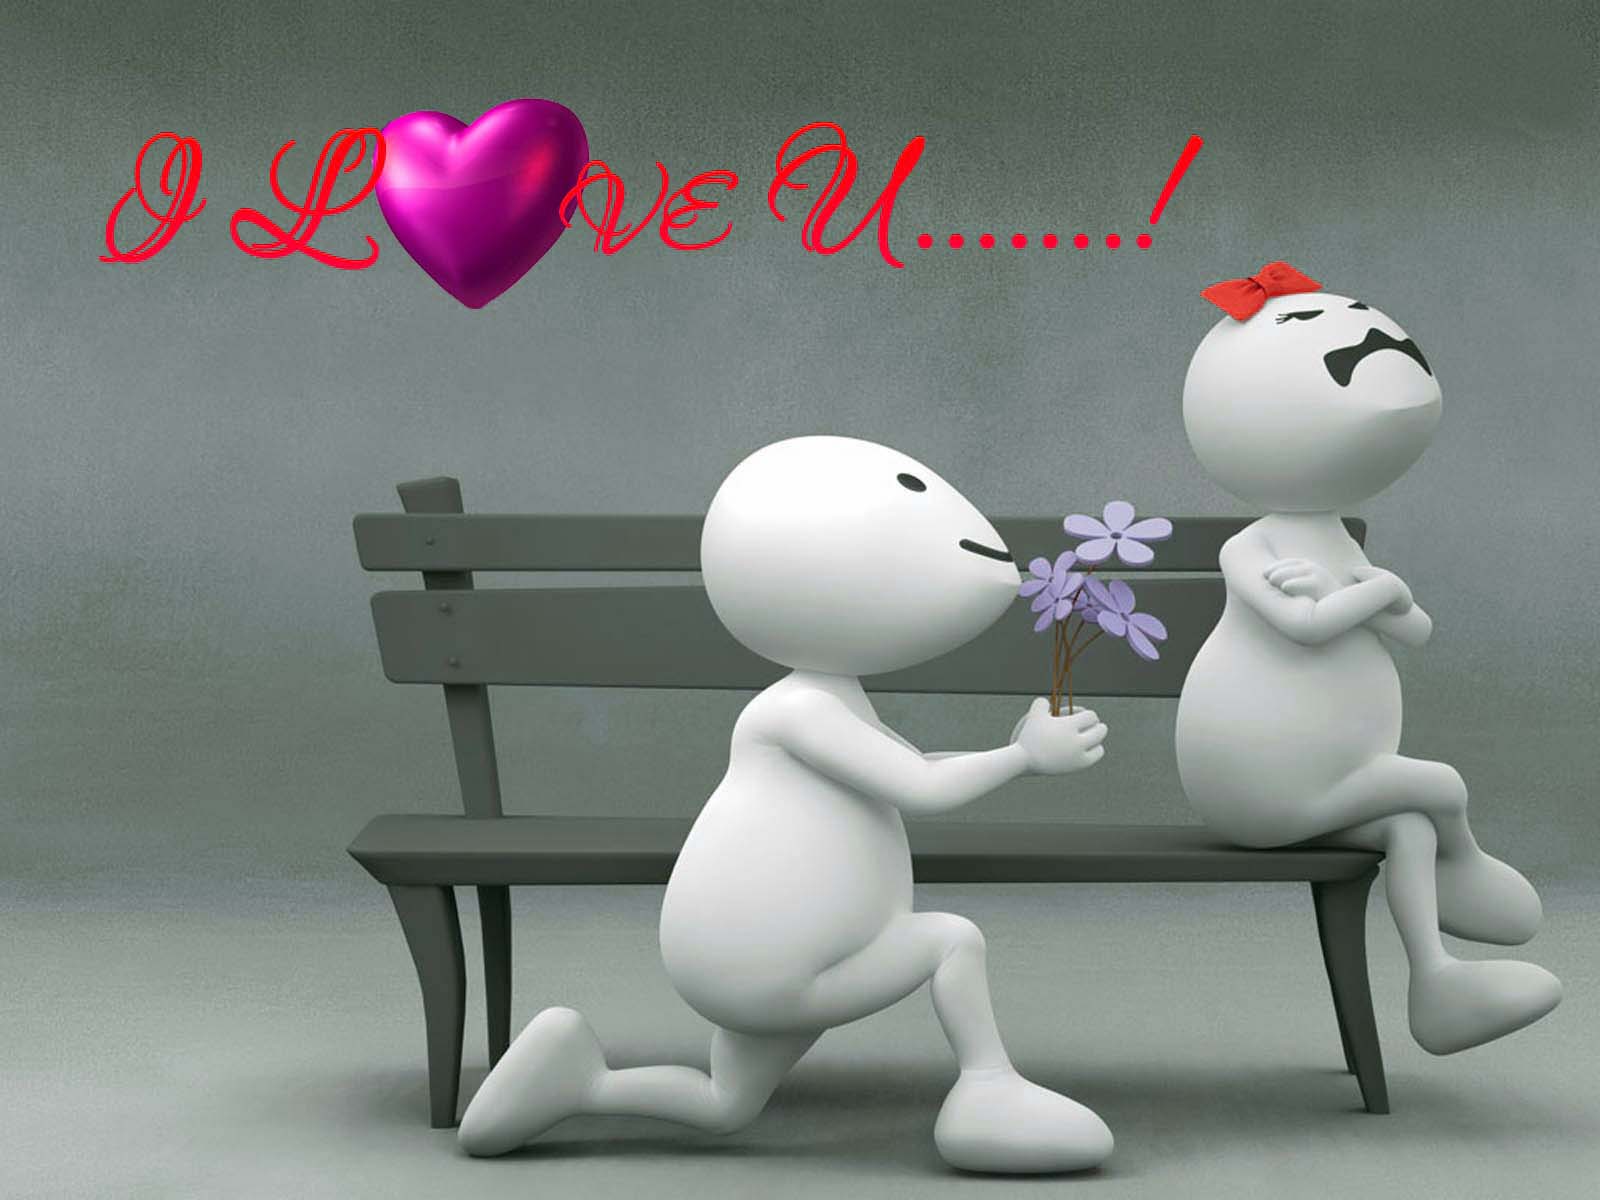 Zoozoo Propose Day Love Vodafone Images - Love Vodafone Zoo Zoo - HD Wallpaper 